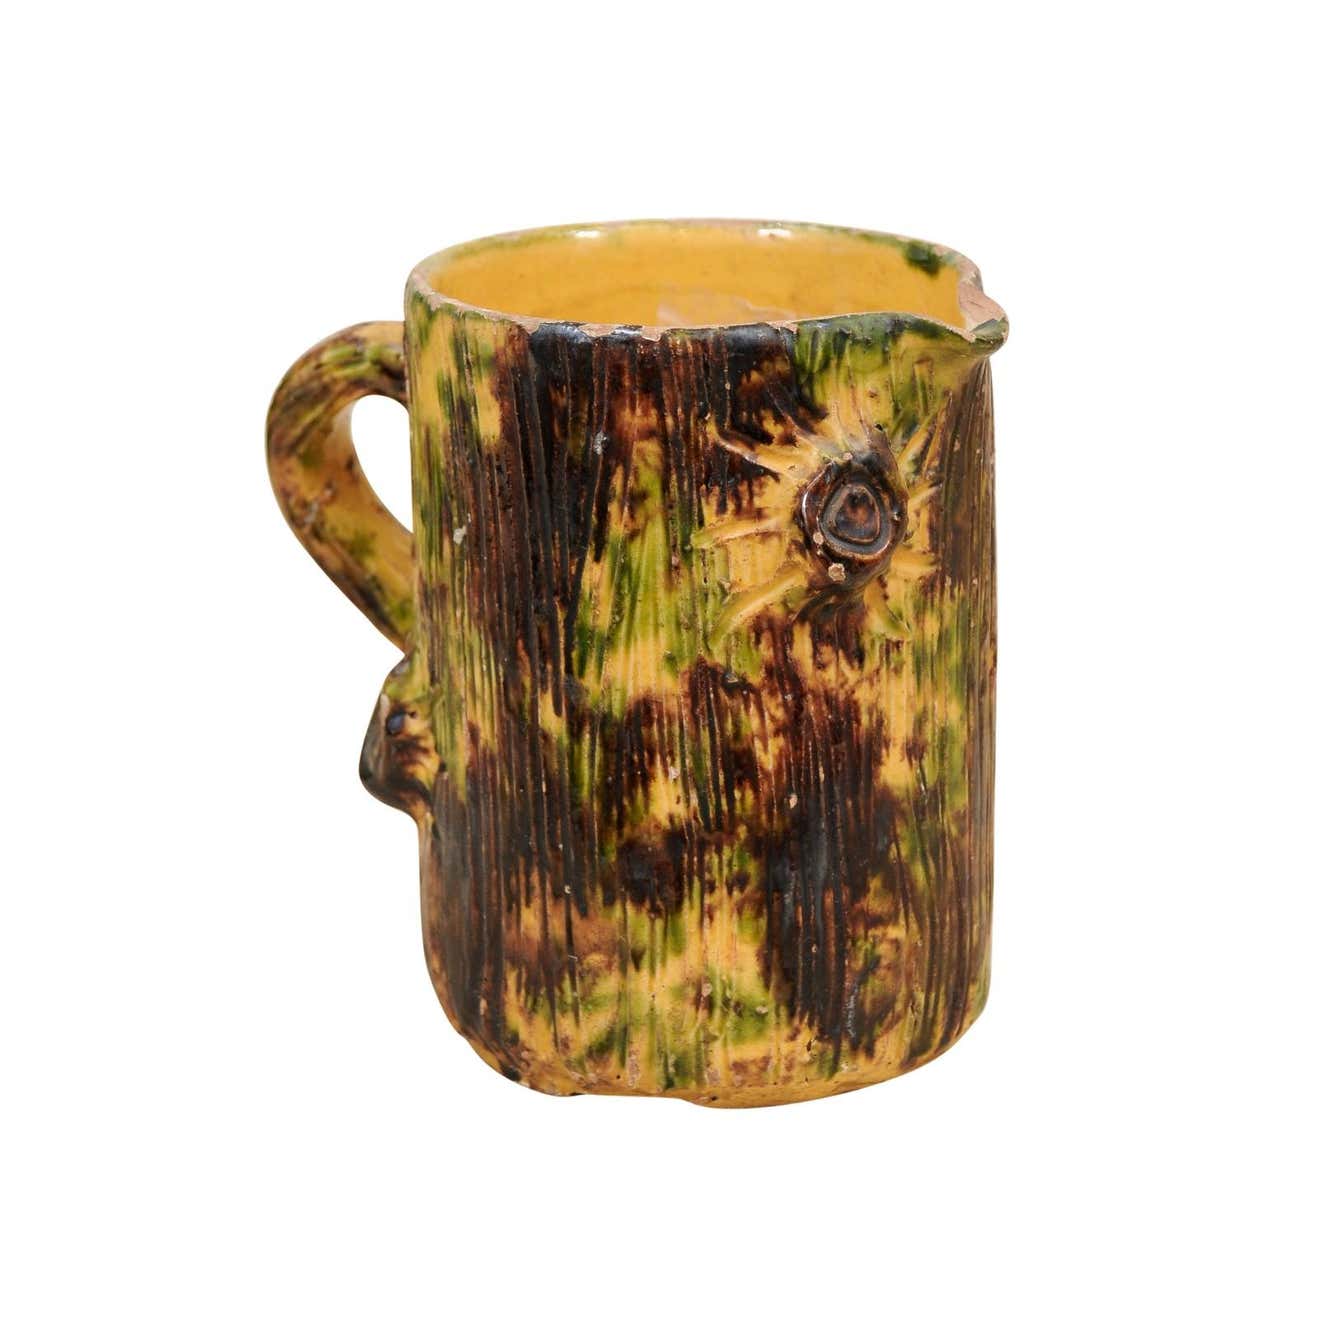 SOLD - French Brown Glazed Pottery Pitcher with Yellow and Green Textured Accents